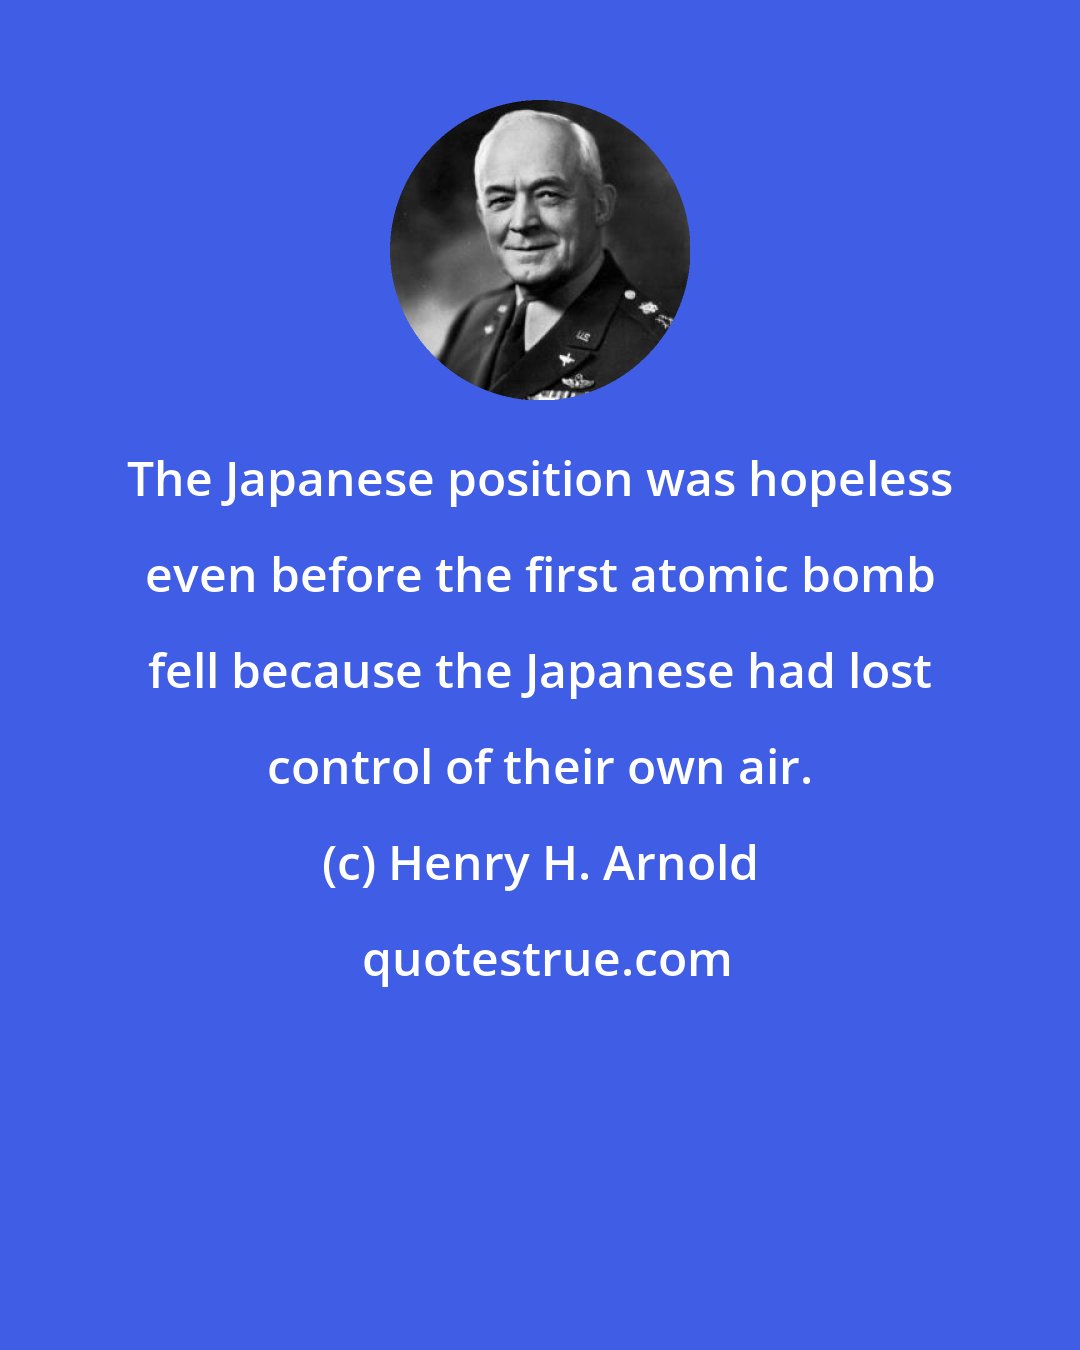 Henry H. Arnold: The Japanese position was hopeless even before the first atomic bomb fell because the Japanese had lost control of their own air.